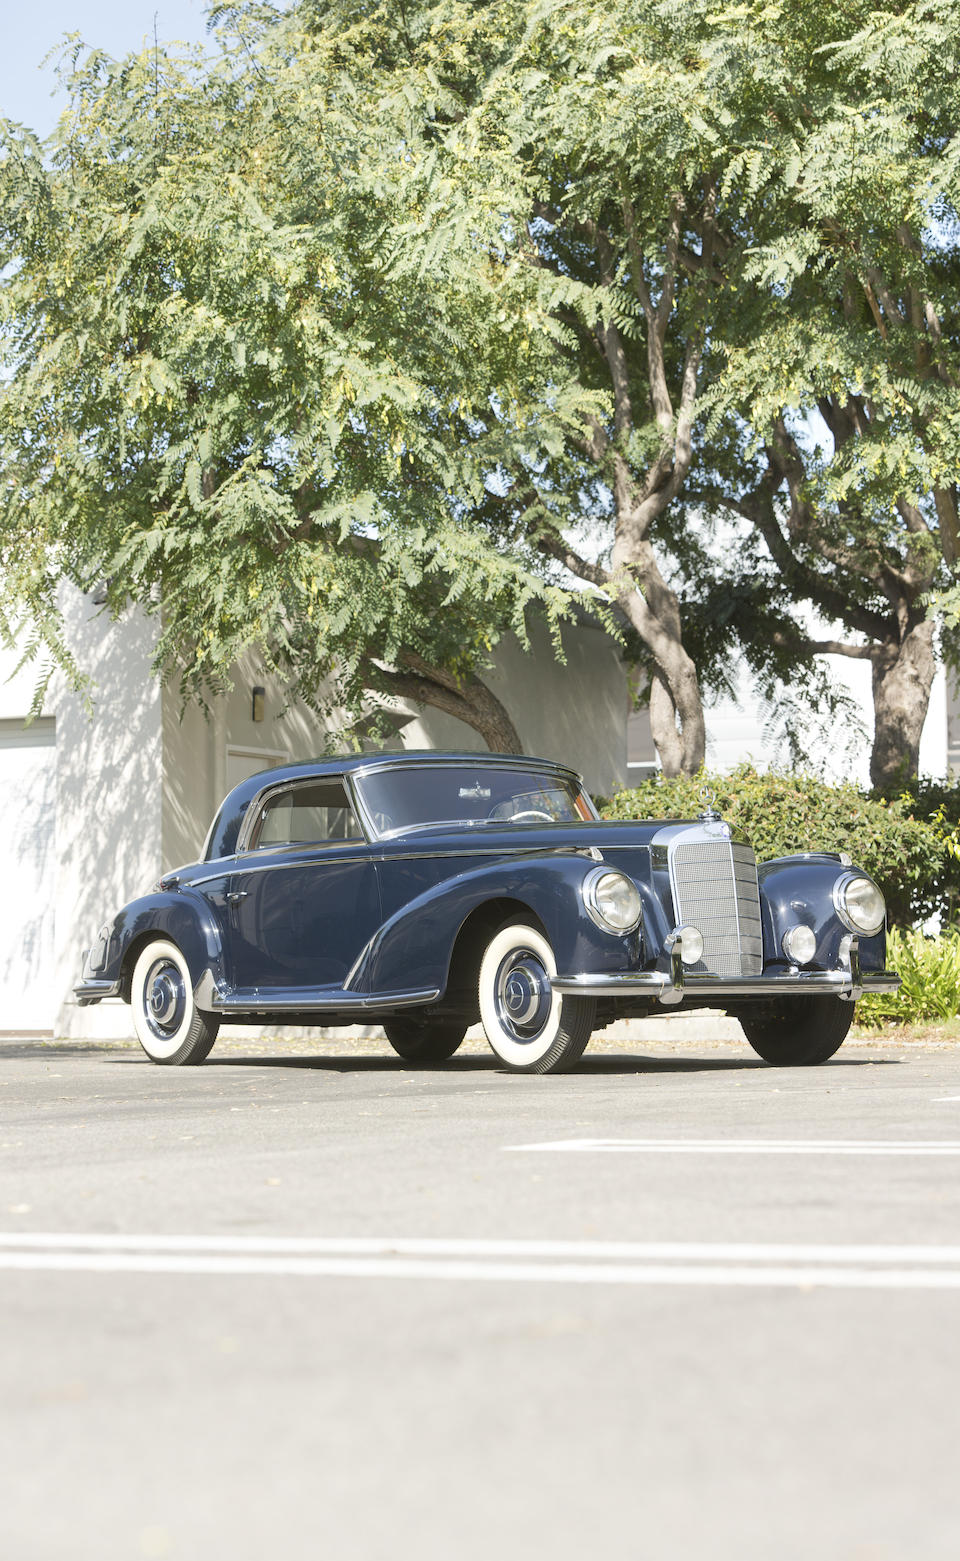 Single family ownership from newOffered from the William M. Keck Estate,1953 Mercedes-Benz 300S Coupe